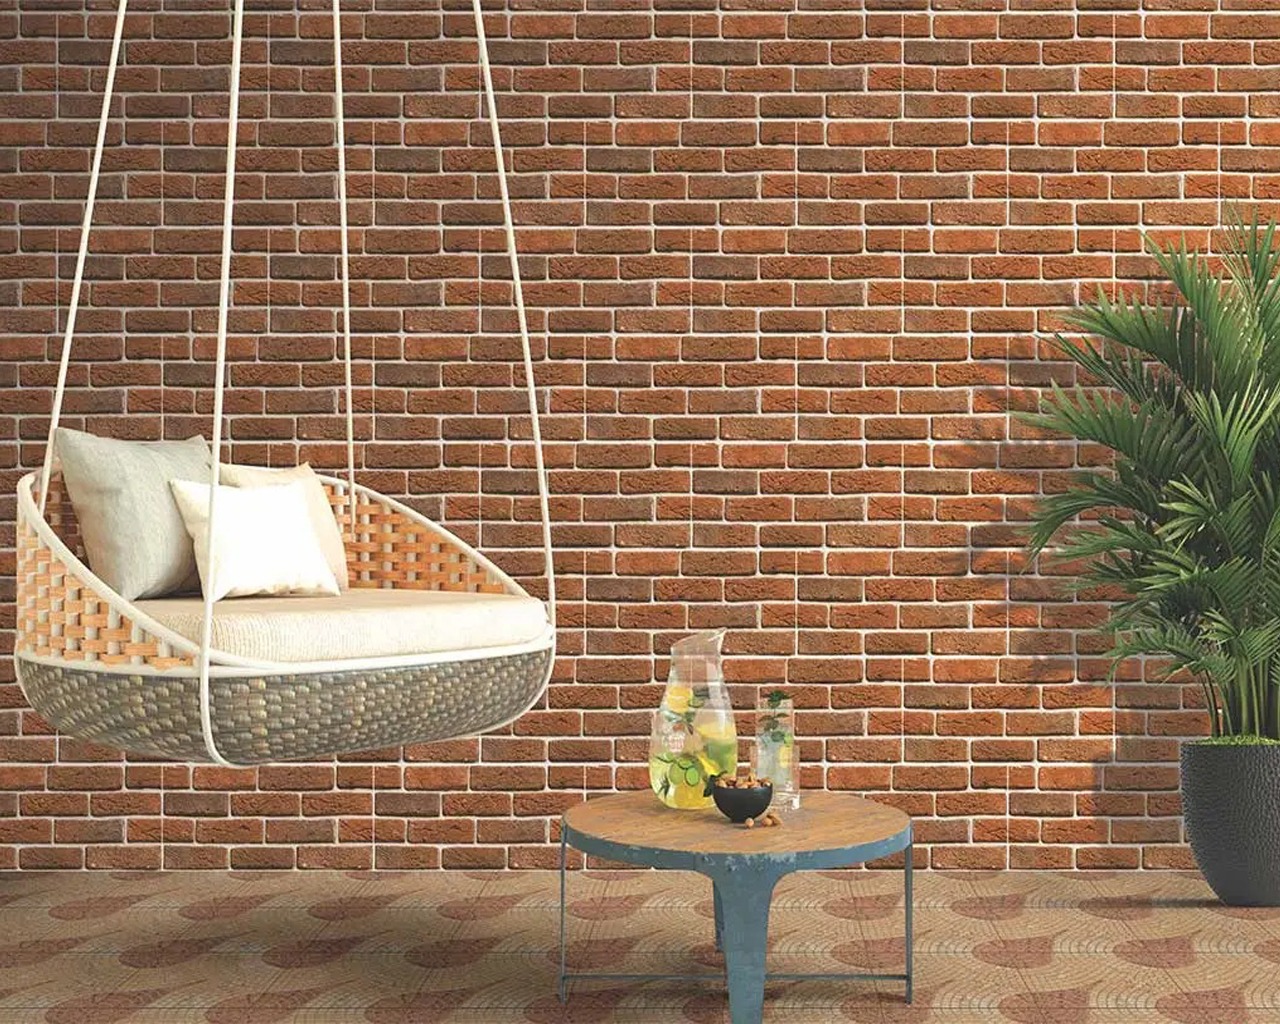 Jazz Up Your Interiors and Exteriors With Brick Tiles - Lycos ...